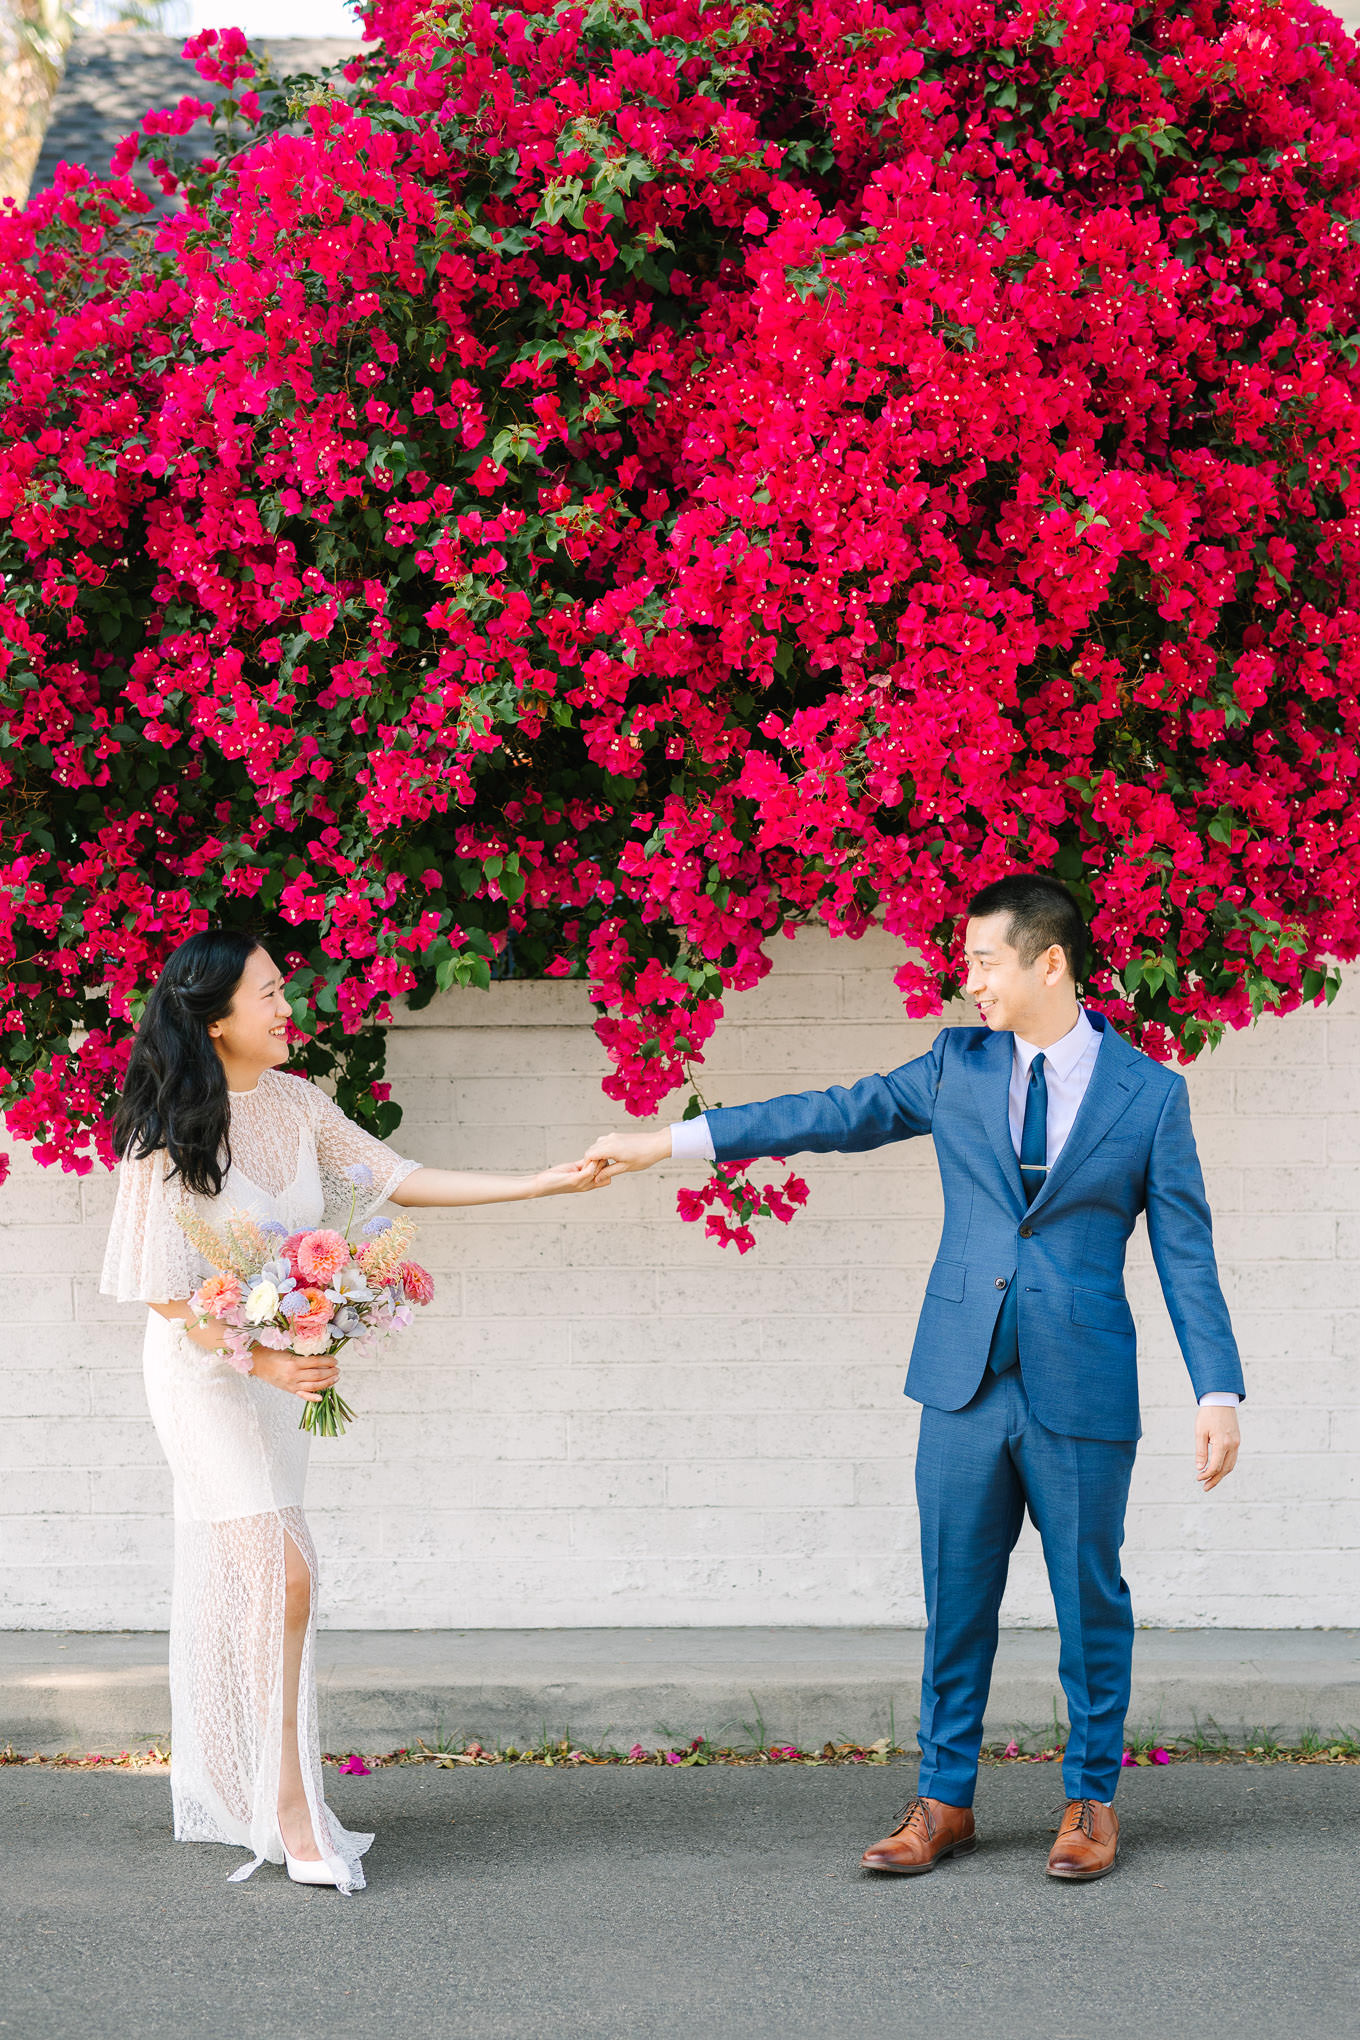 Toluca Lake bougainvillea elopement | Wedding and elopement photography roundup | Los Angeles and Palm Springs photographer | #losangeleswedding #palmspringswedding #elopementphotographer Source: Mary Costa Photography | Los Angeles